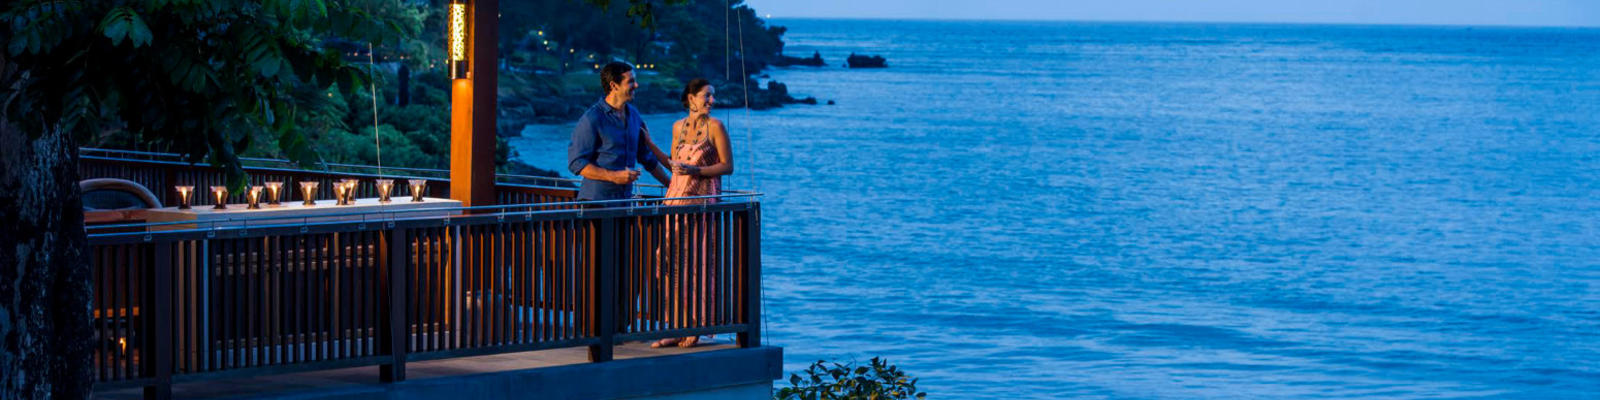 Two people standing on a balcony with drinks overlooking the ocean